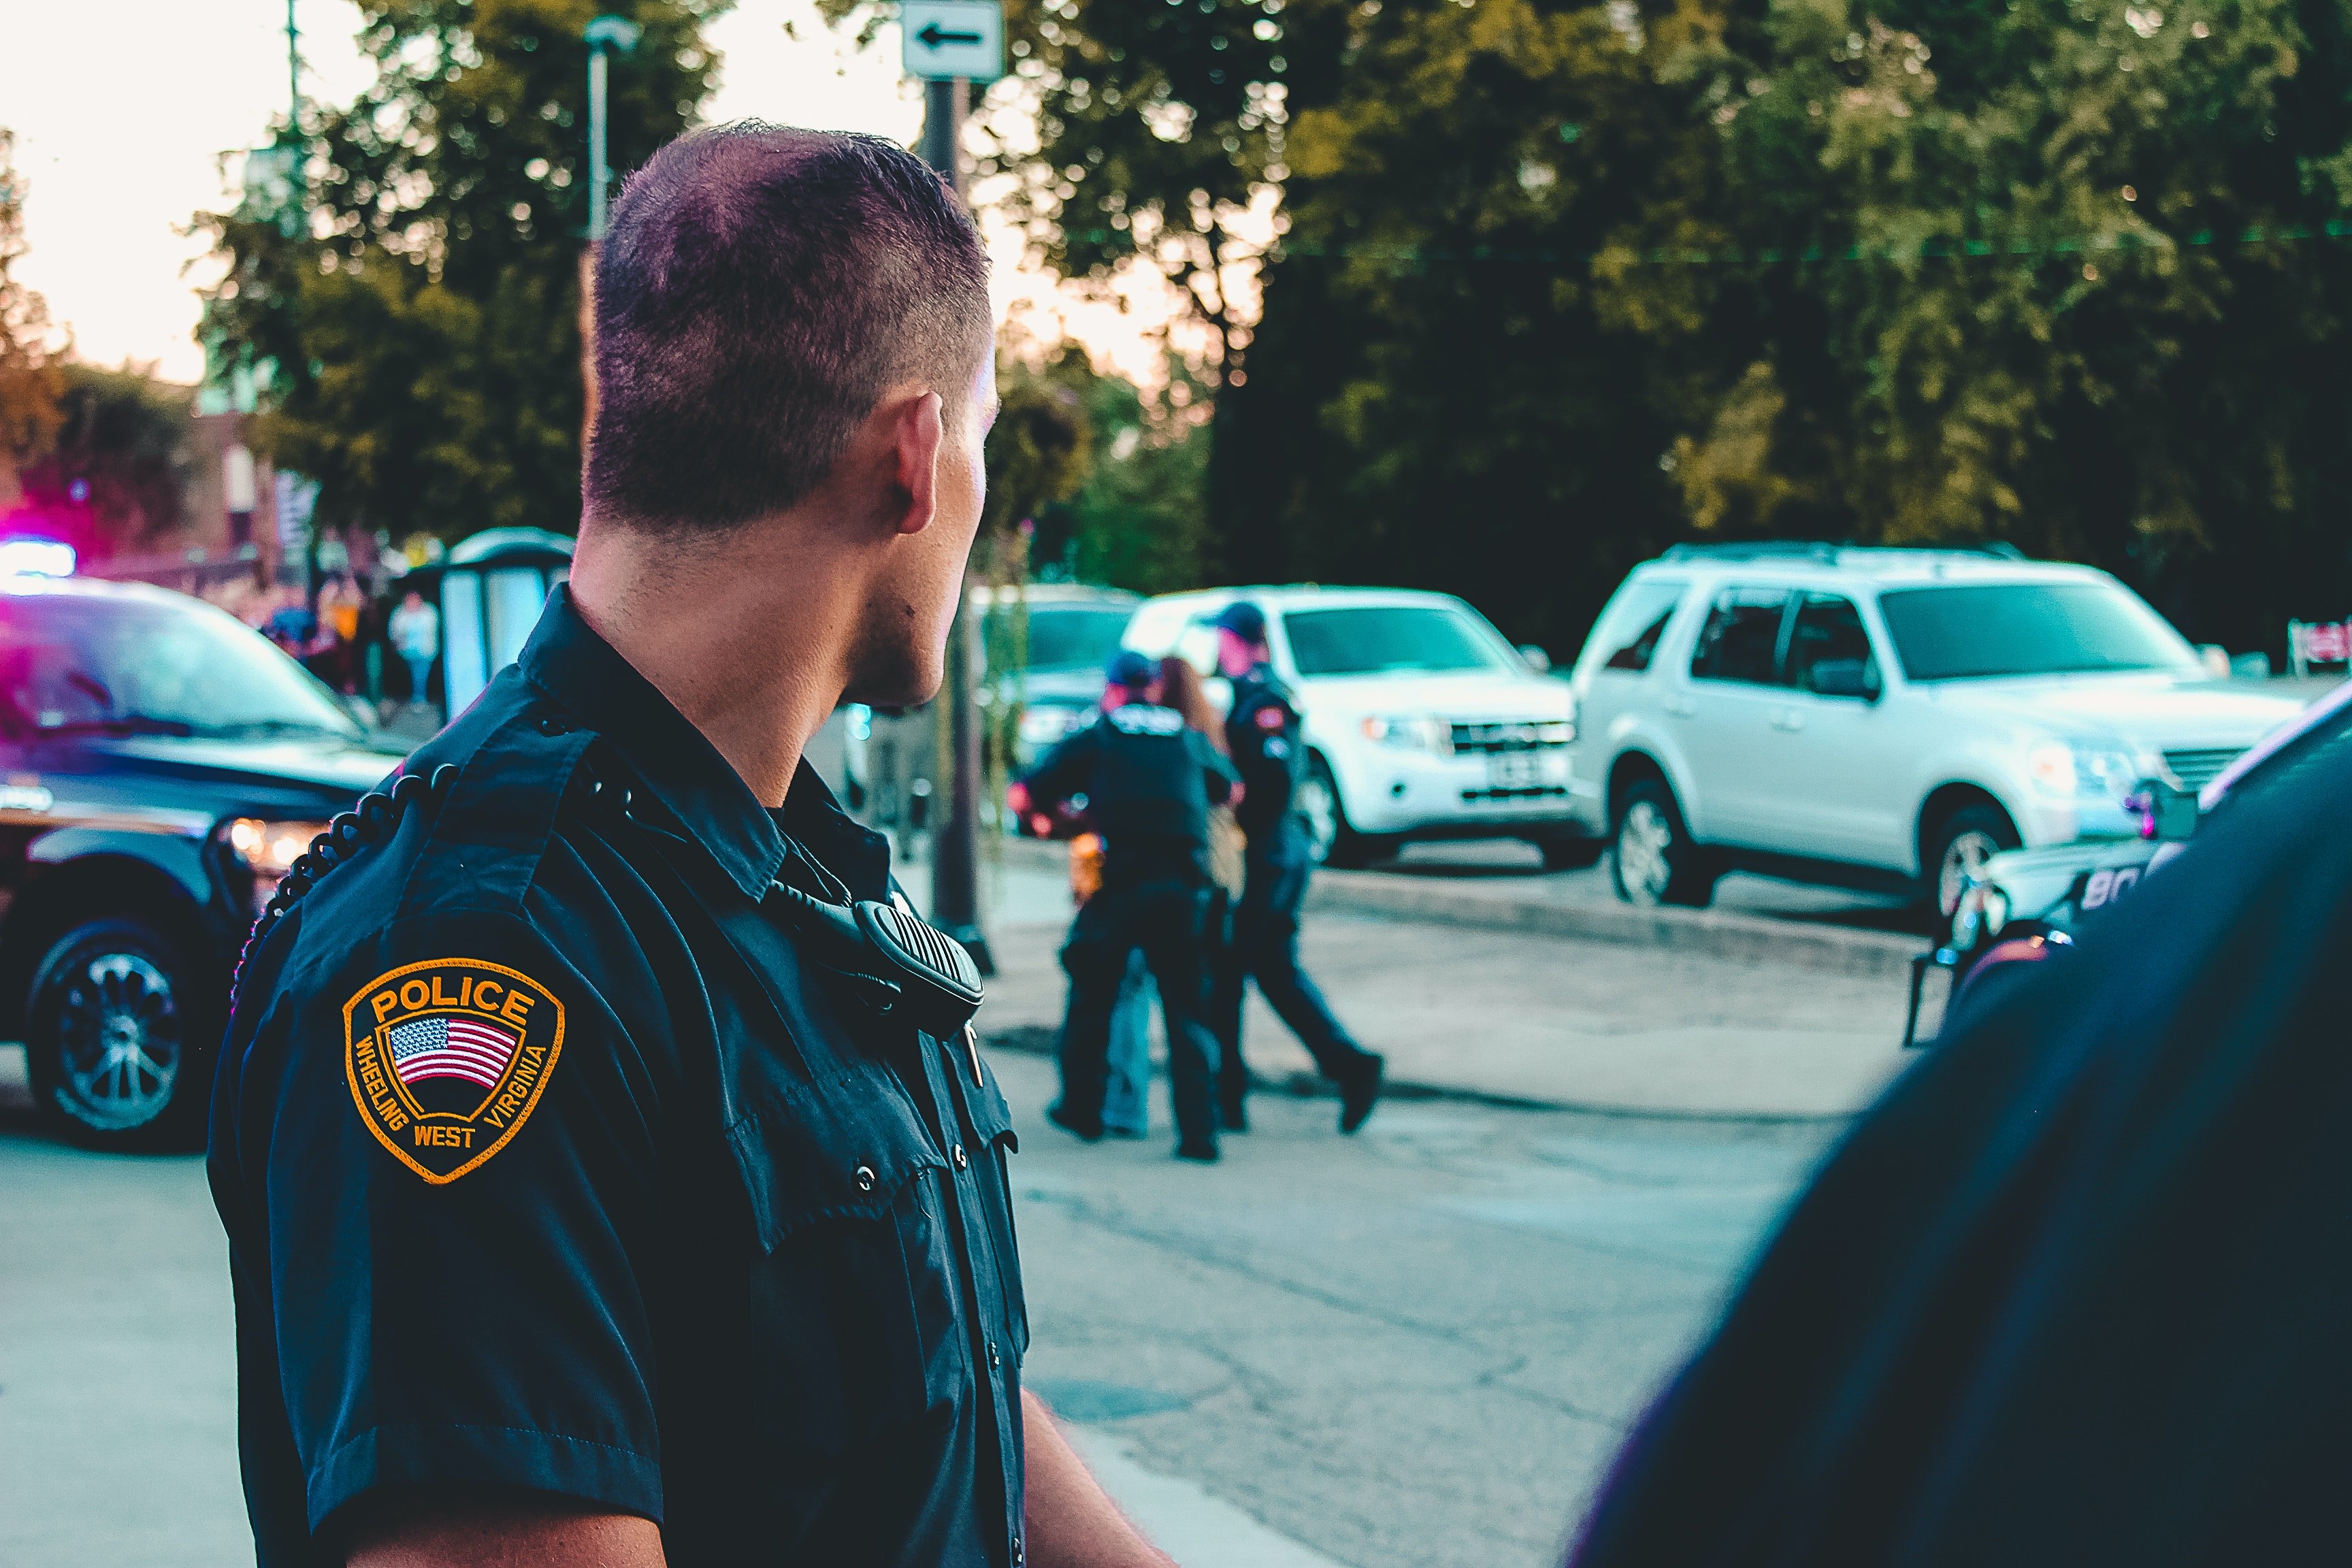 Pictured - A police officer wearing his uniform | Source: Pexels